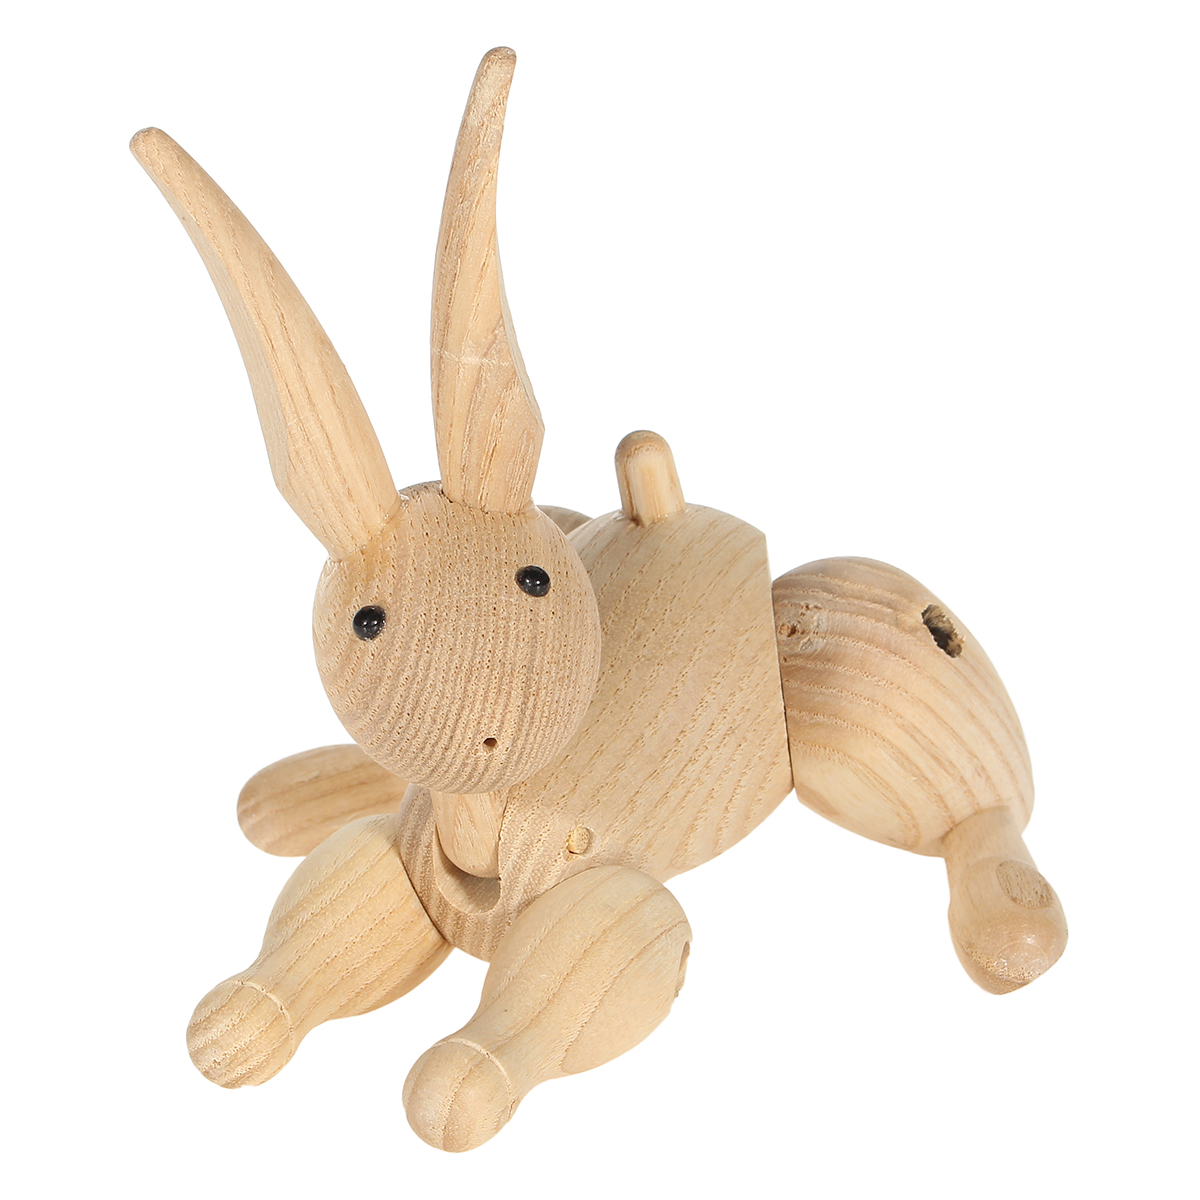 Wood-Carving-Miss-Rabbit-Figurines-Joints-Puppets-Animal-Art-Home-Decoration-Crafts-1241724-6